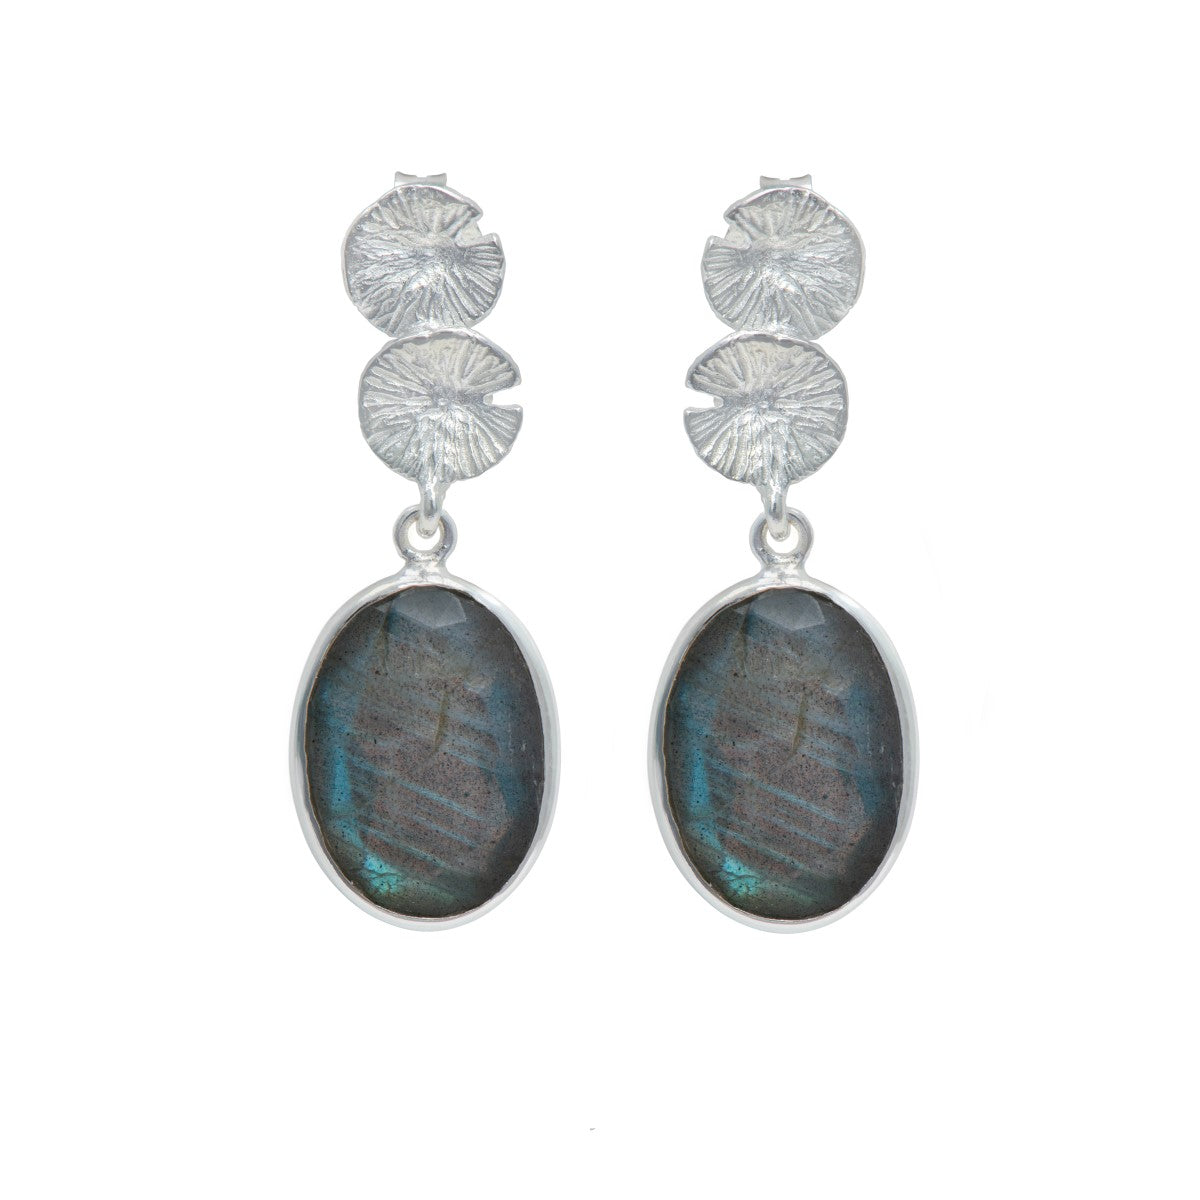 Lily Pad Earrings in Sterling Silver with a Labradorite Gemstone Drop